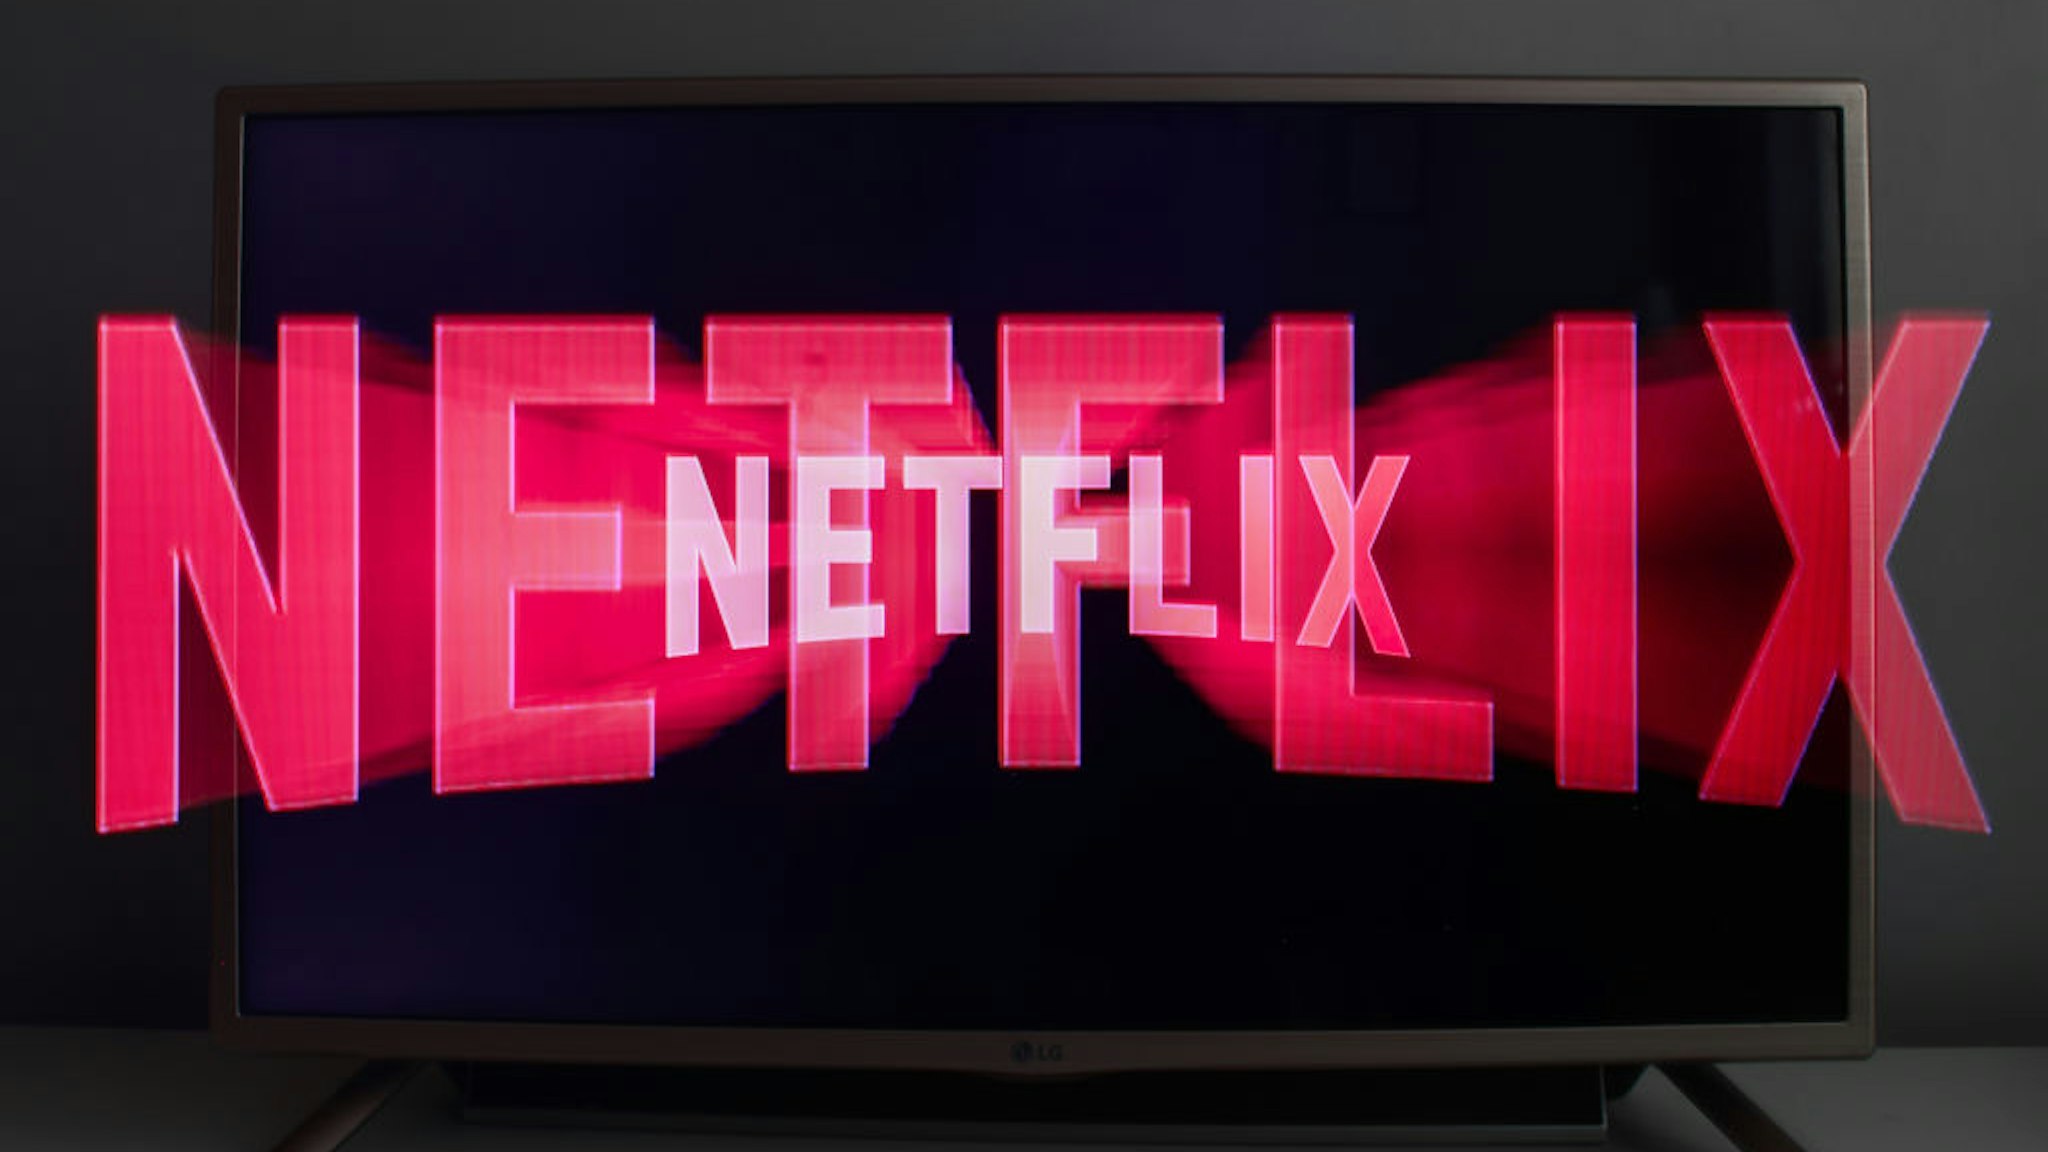 Netflix logo displayed on a tv screen is seen in this illustration photo taken in Krakow, Poland on July 19, 2021.